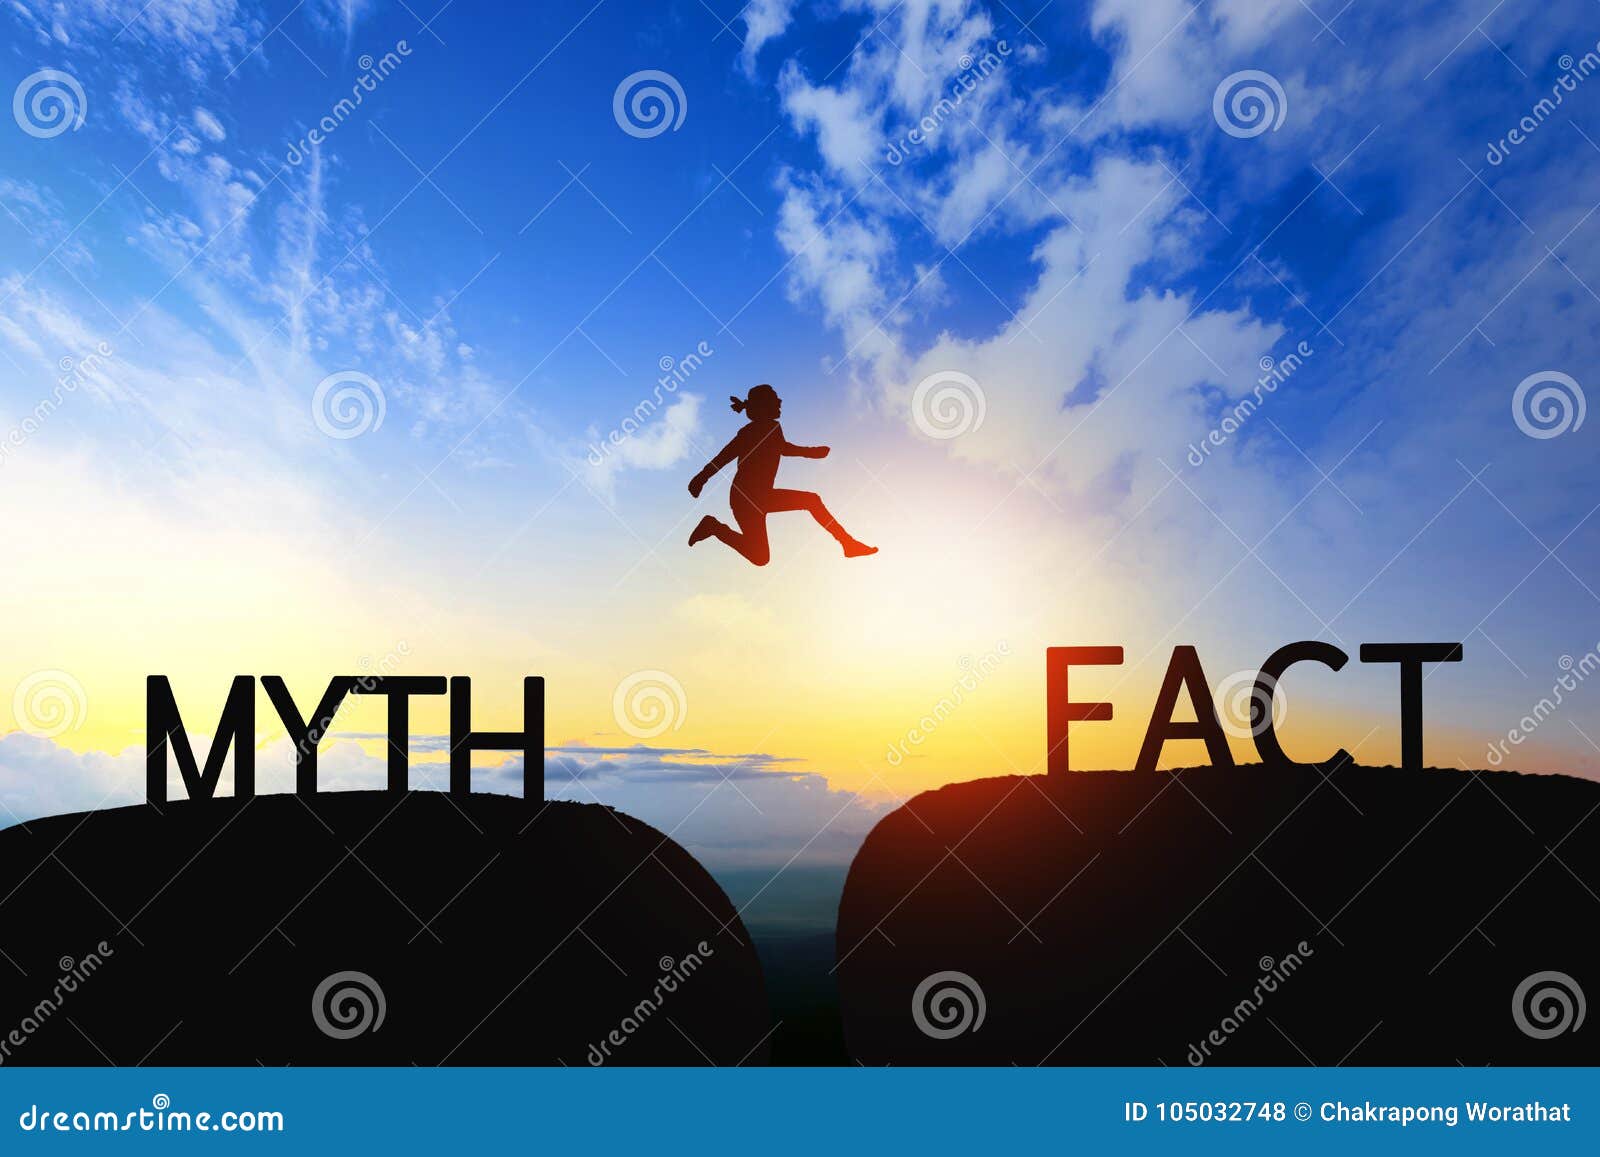 woman jump through the gap between myth to fact on sunset.